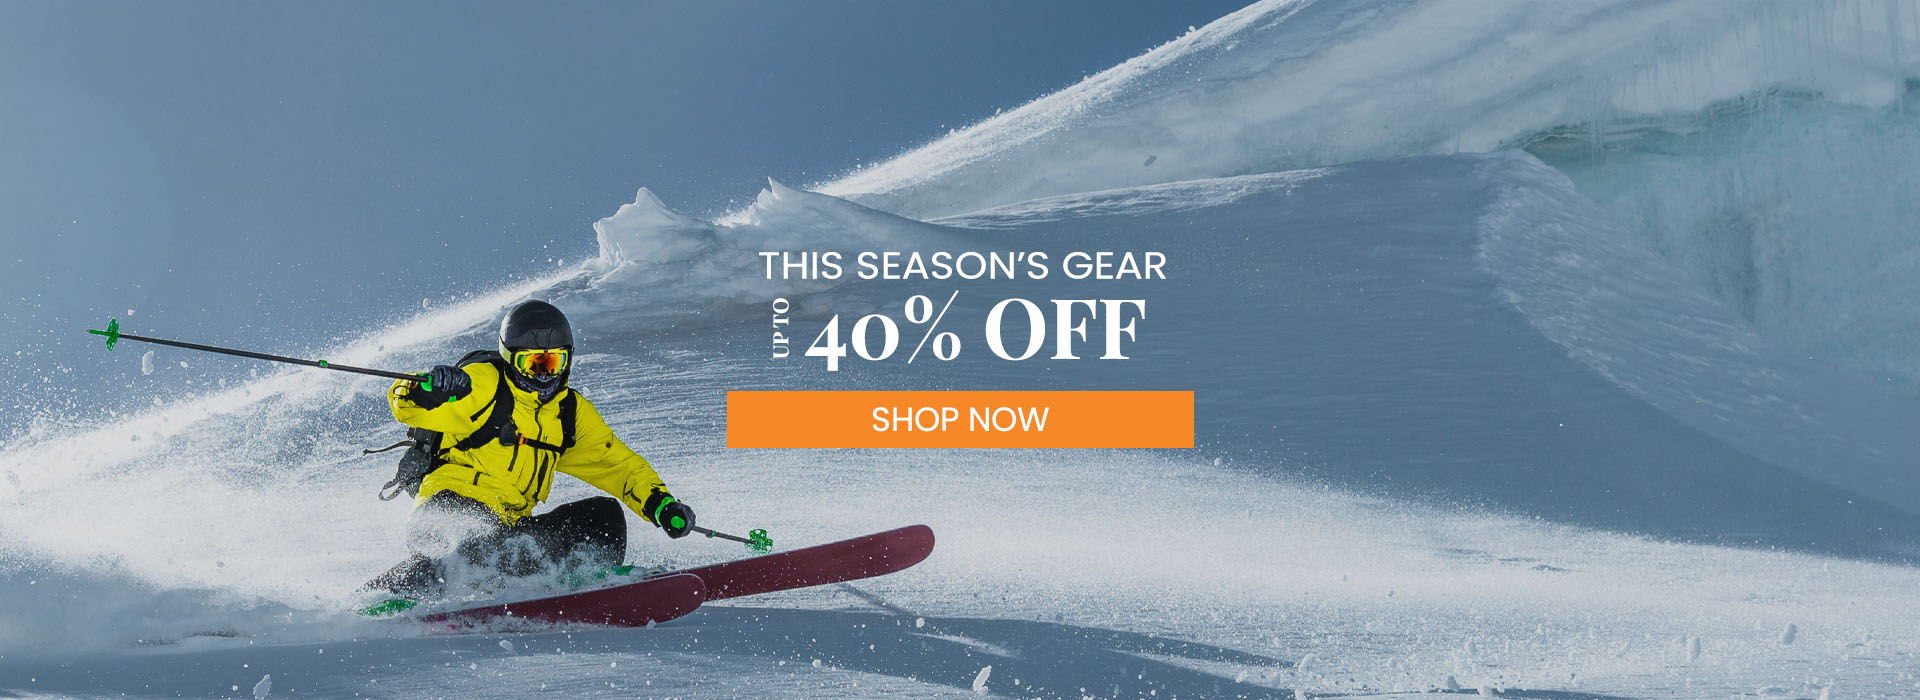 Save up to 40% OFF this season's ski and snowboard gear at BlueZone Sports!